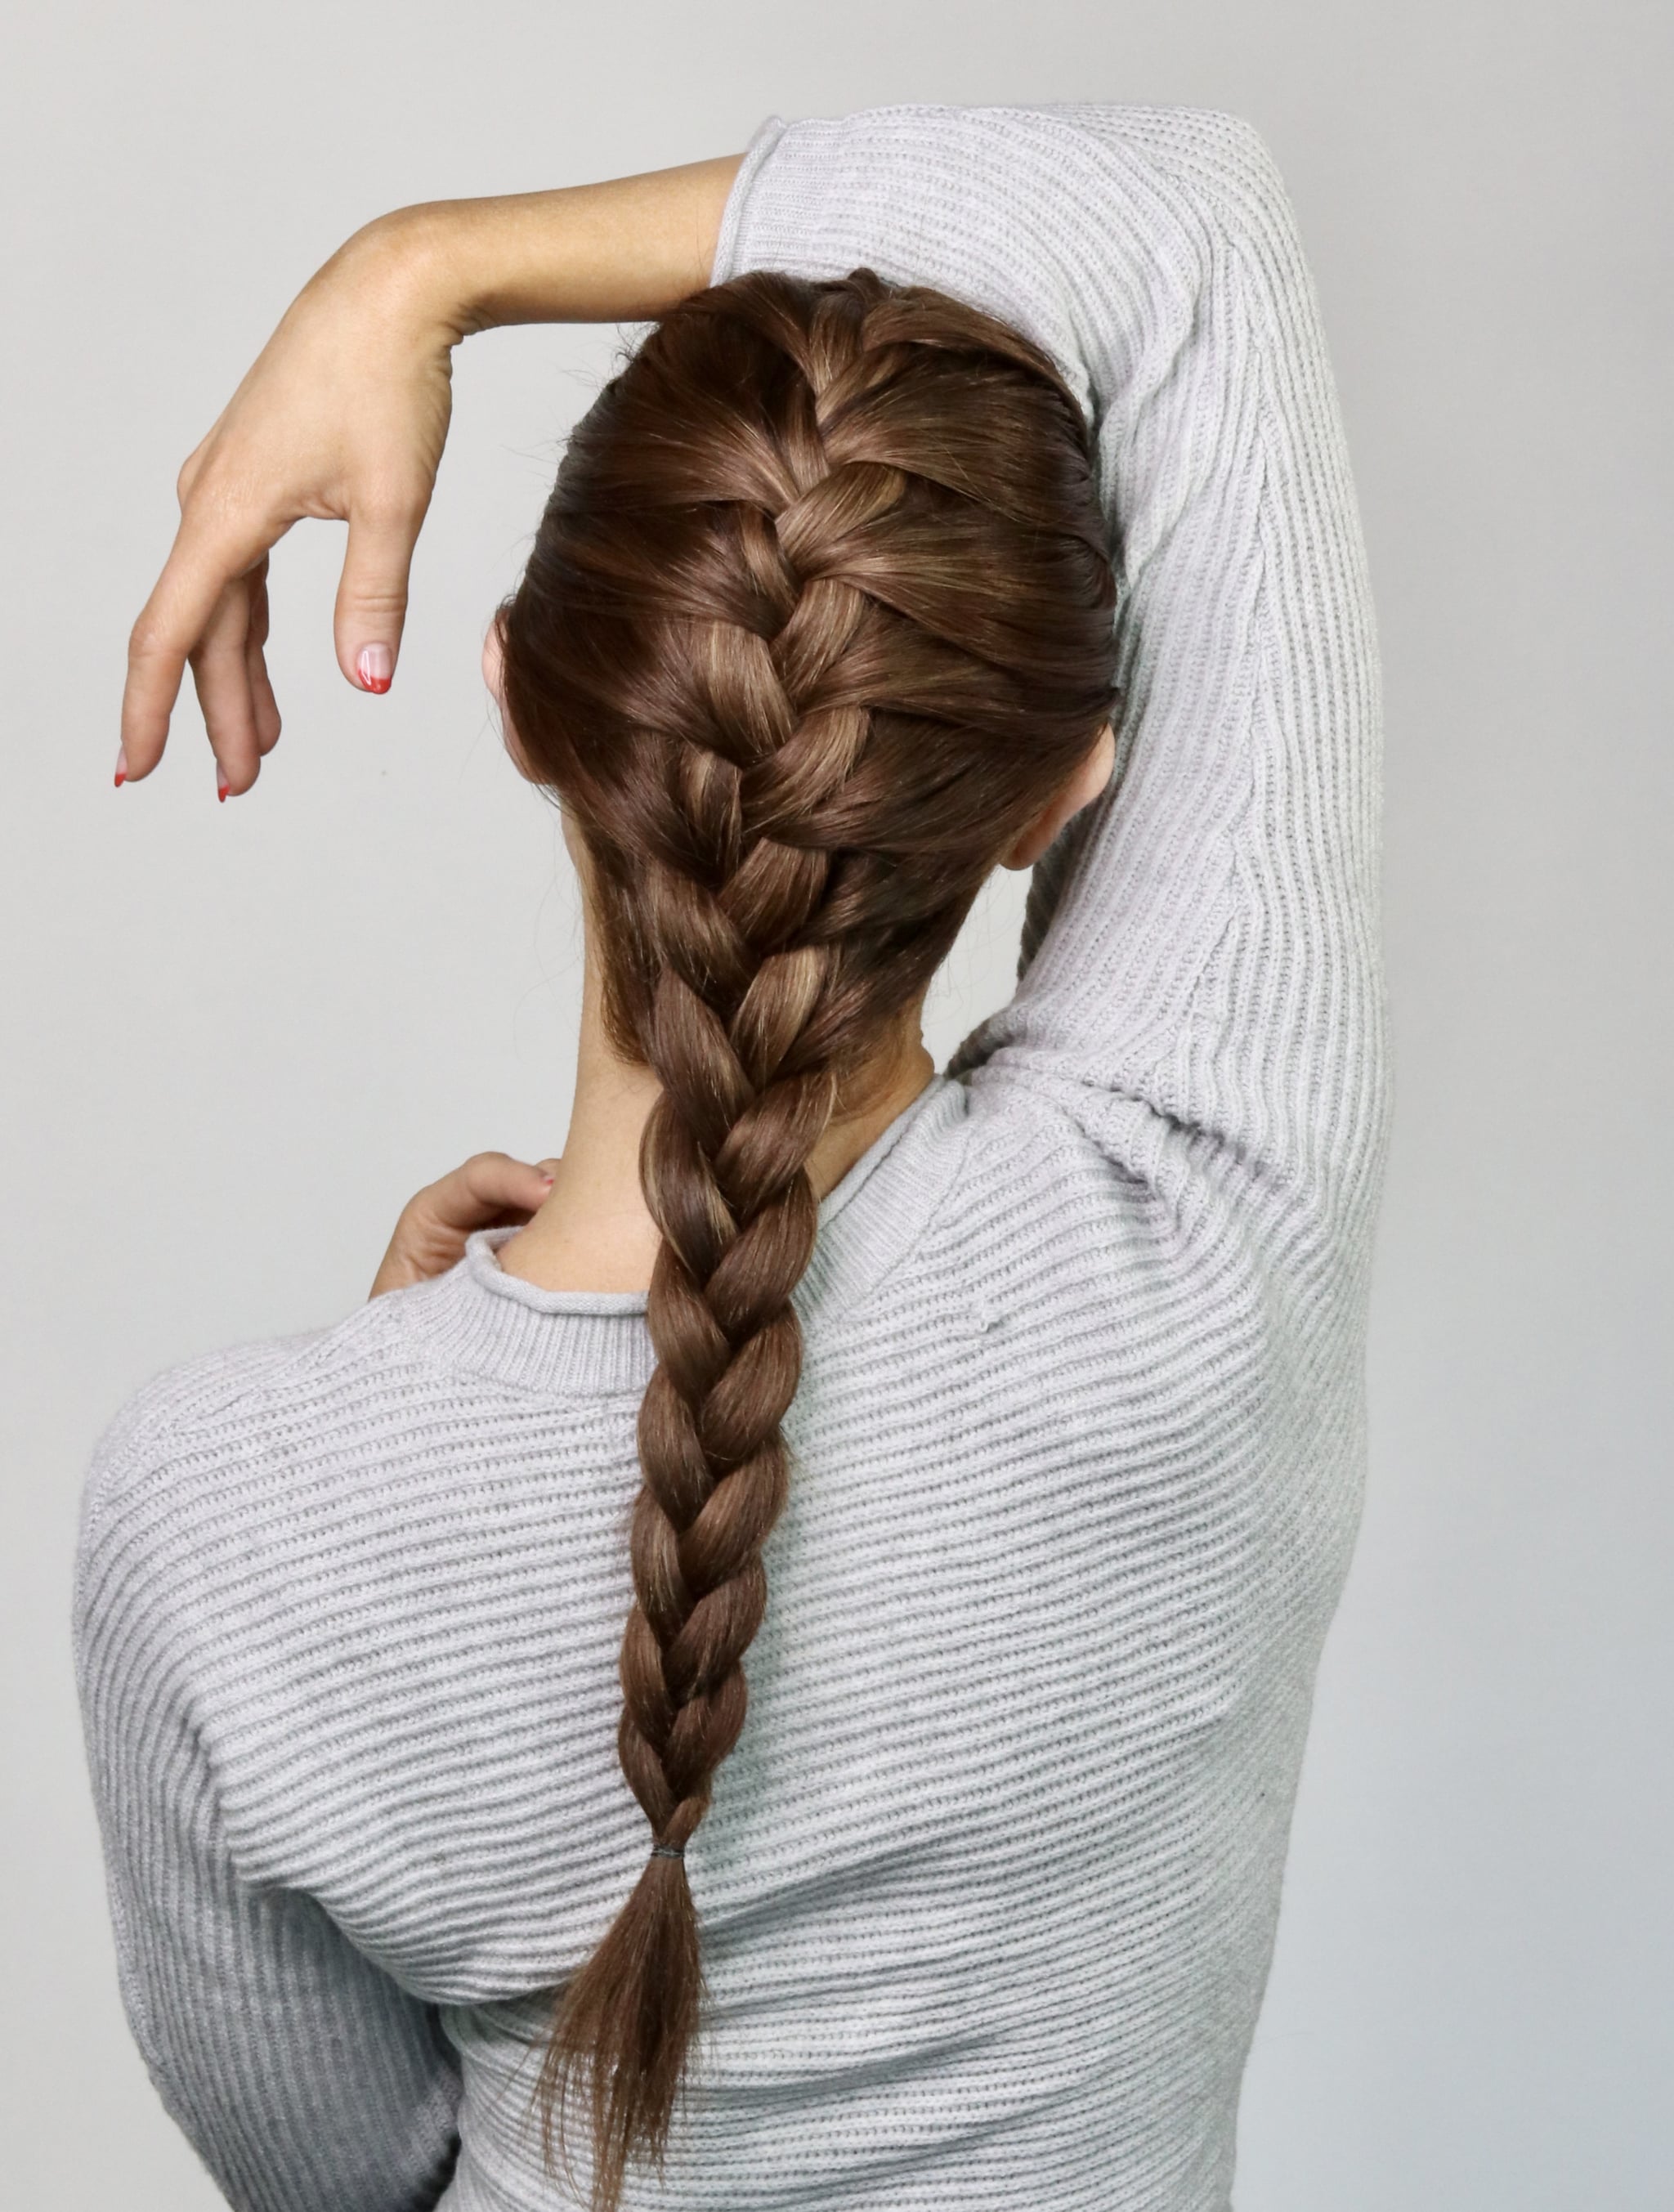 How to French Braid Your Hair: Step-by-Step Tutorial | POPSUGAR Beauty UK